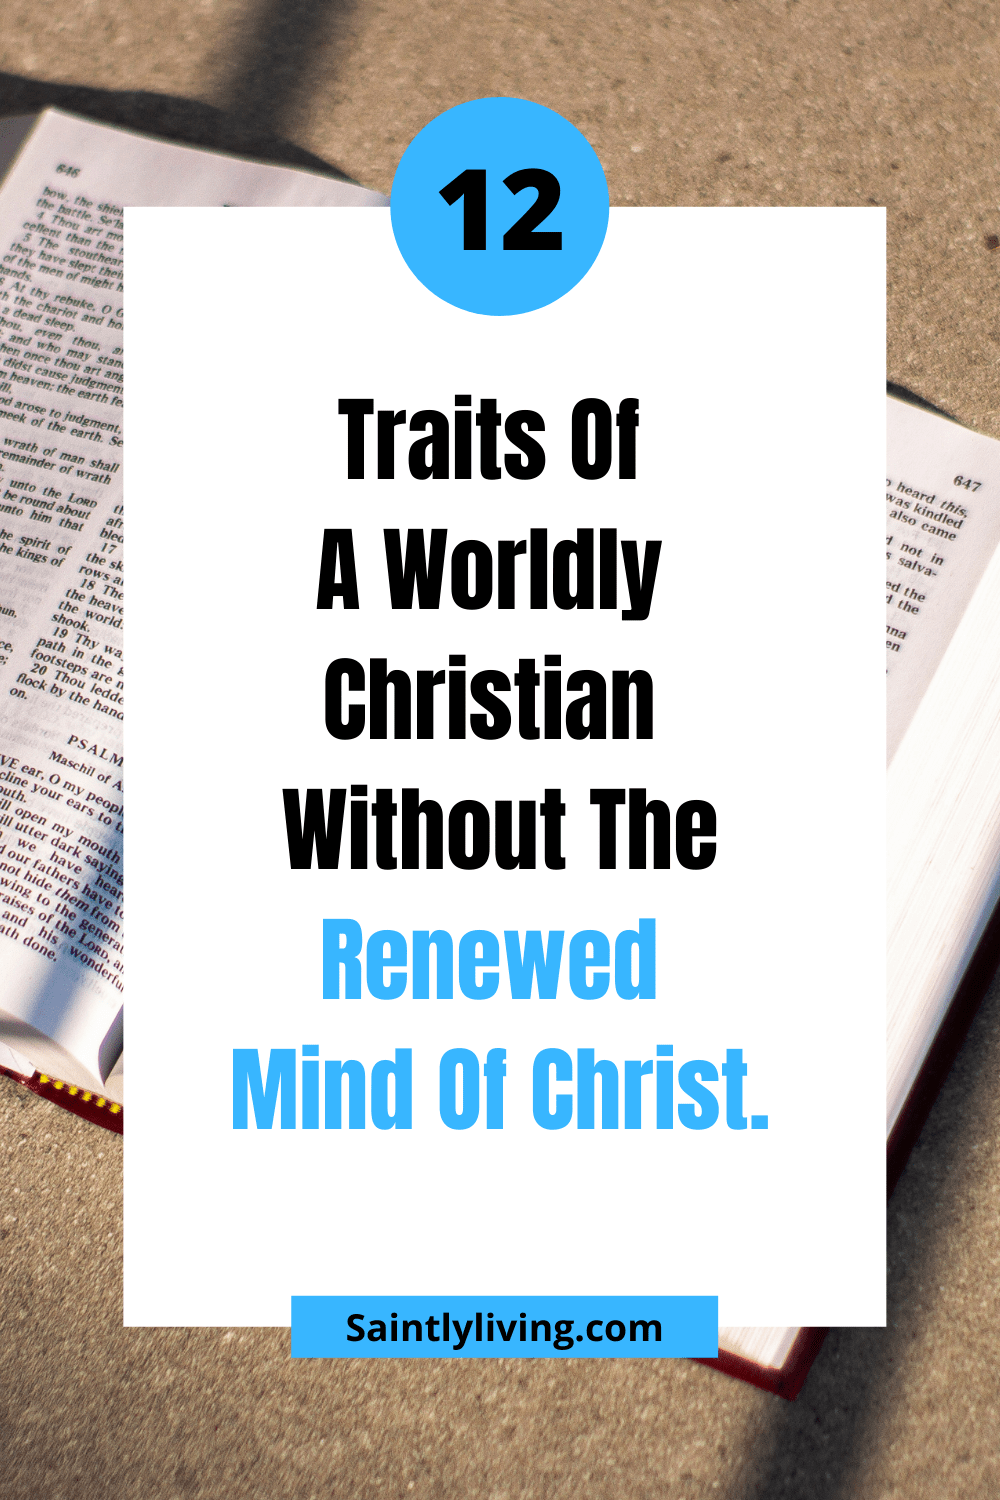 characteristics-of-a-worldly-Christian.